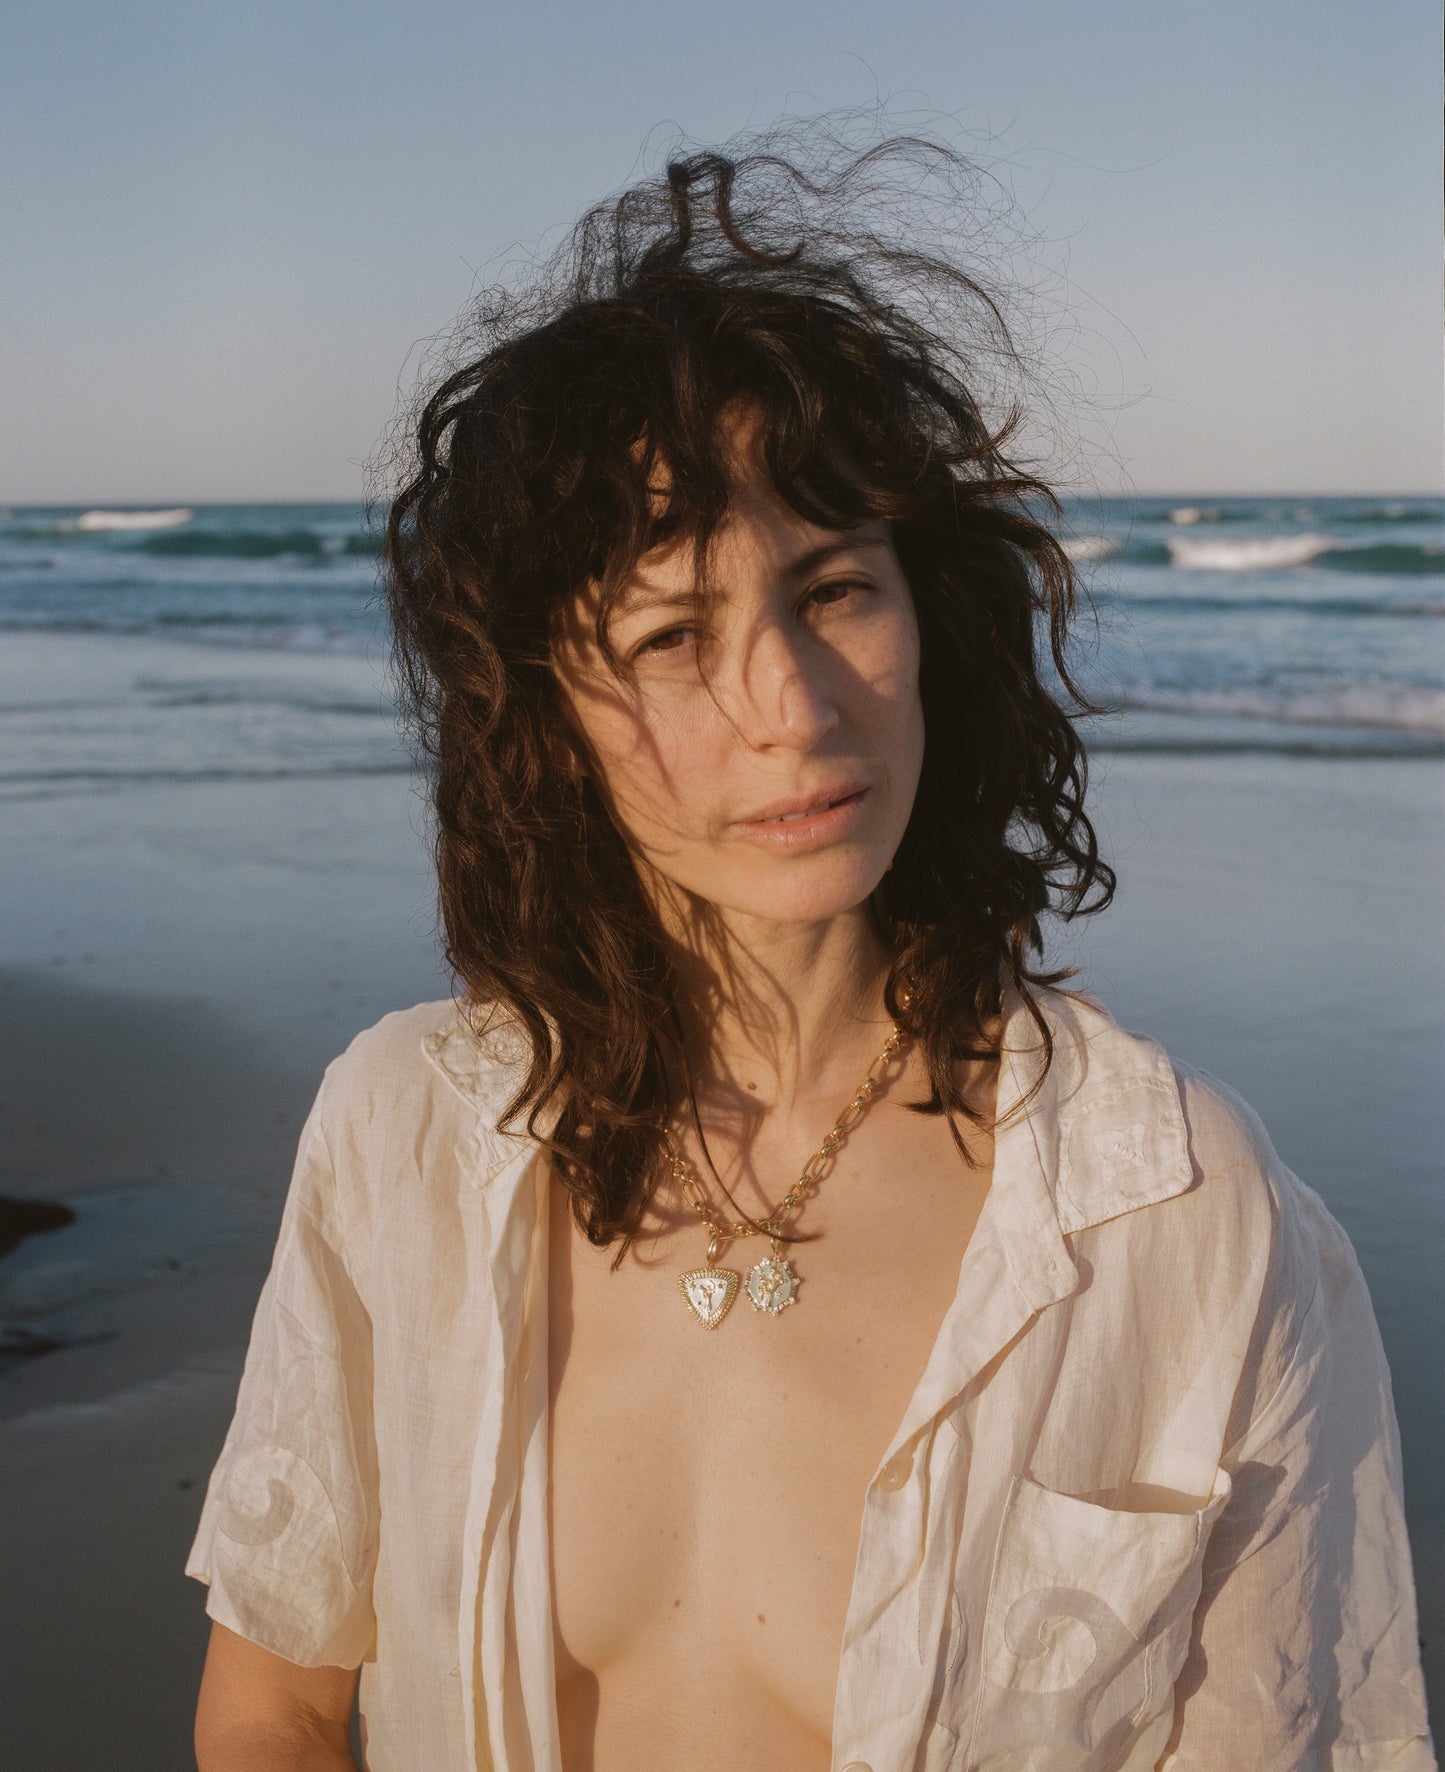 Woman at the beach with white open shirt and gold necklace